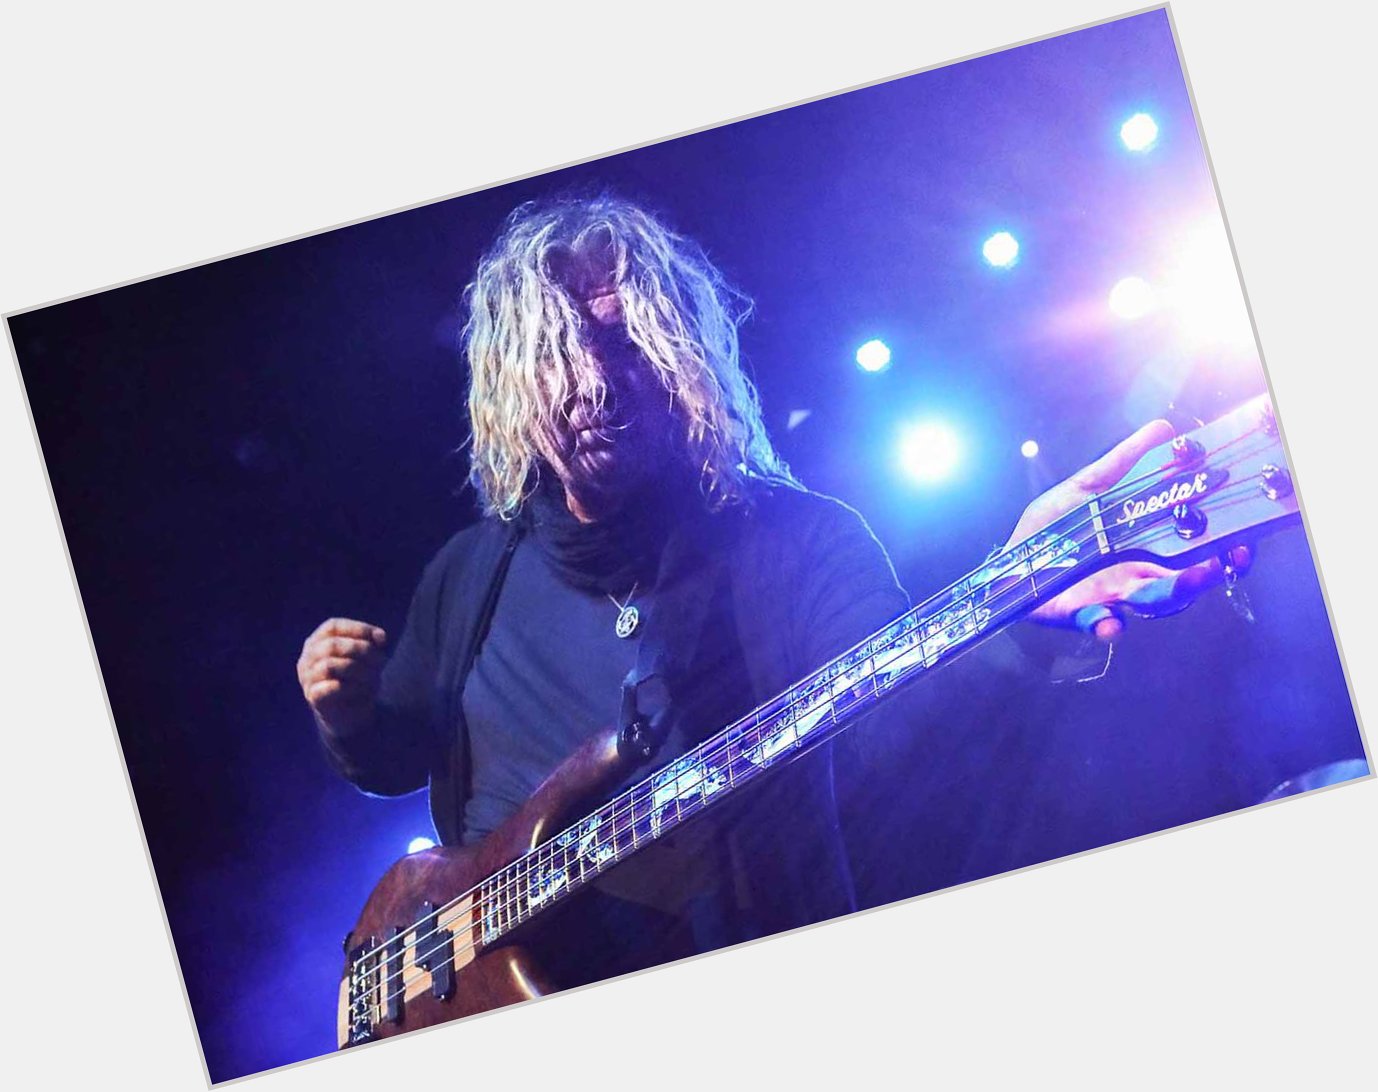 Please join us in wishing a very happy birthday to YES bassist Billy Sherwood! 